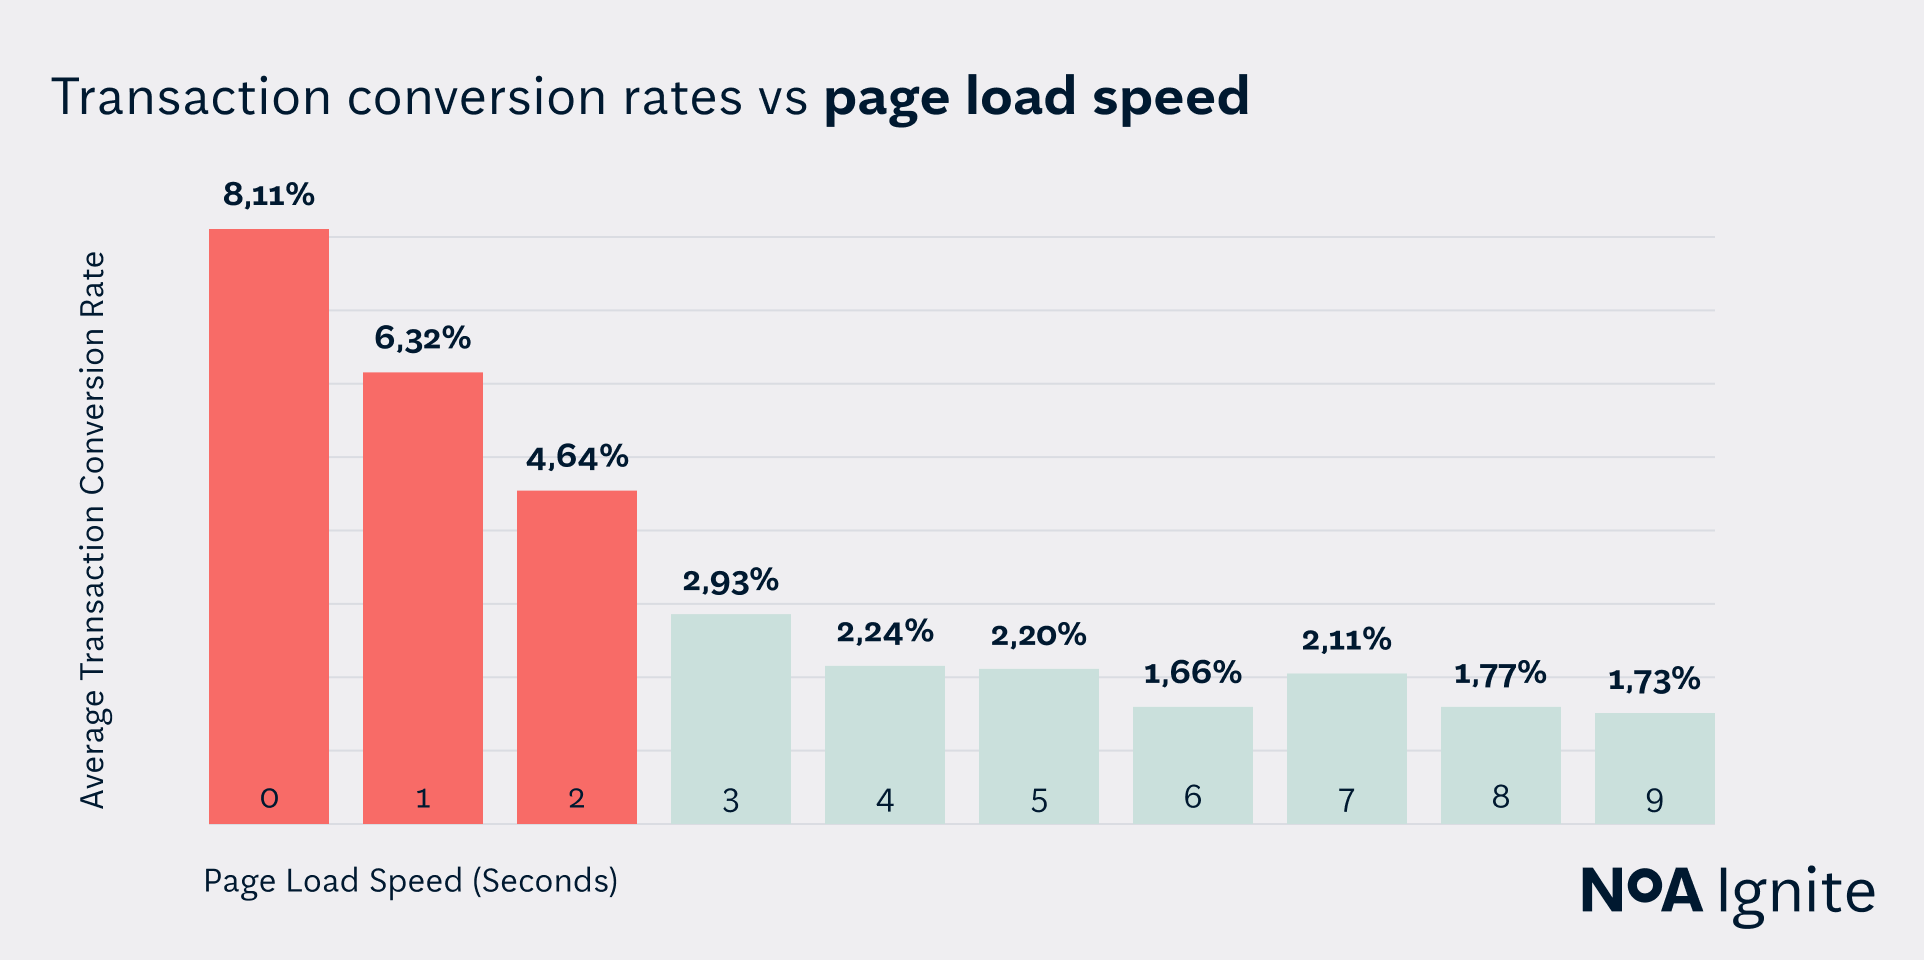 Transaction conversion rates vs page load speed